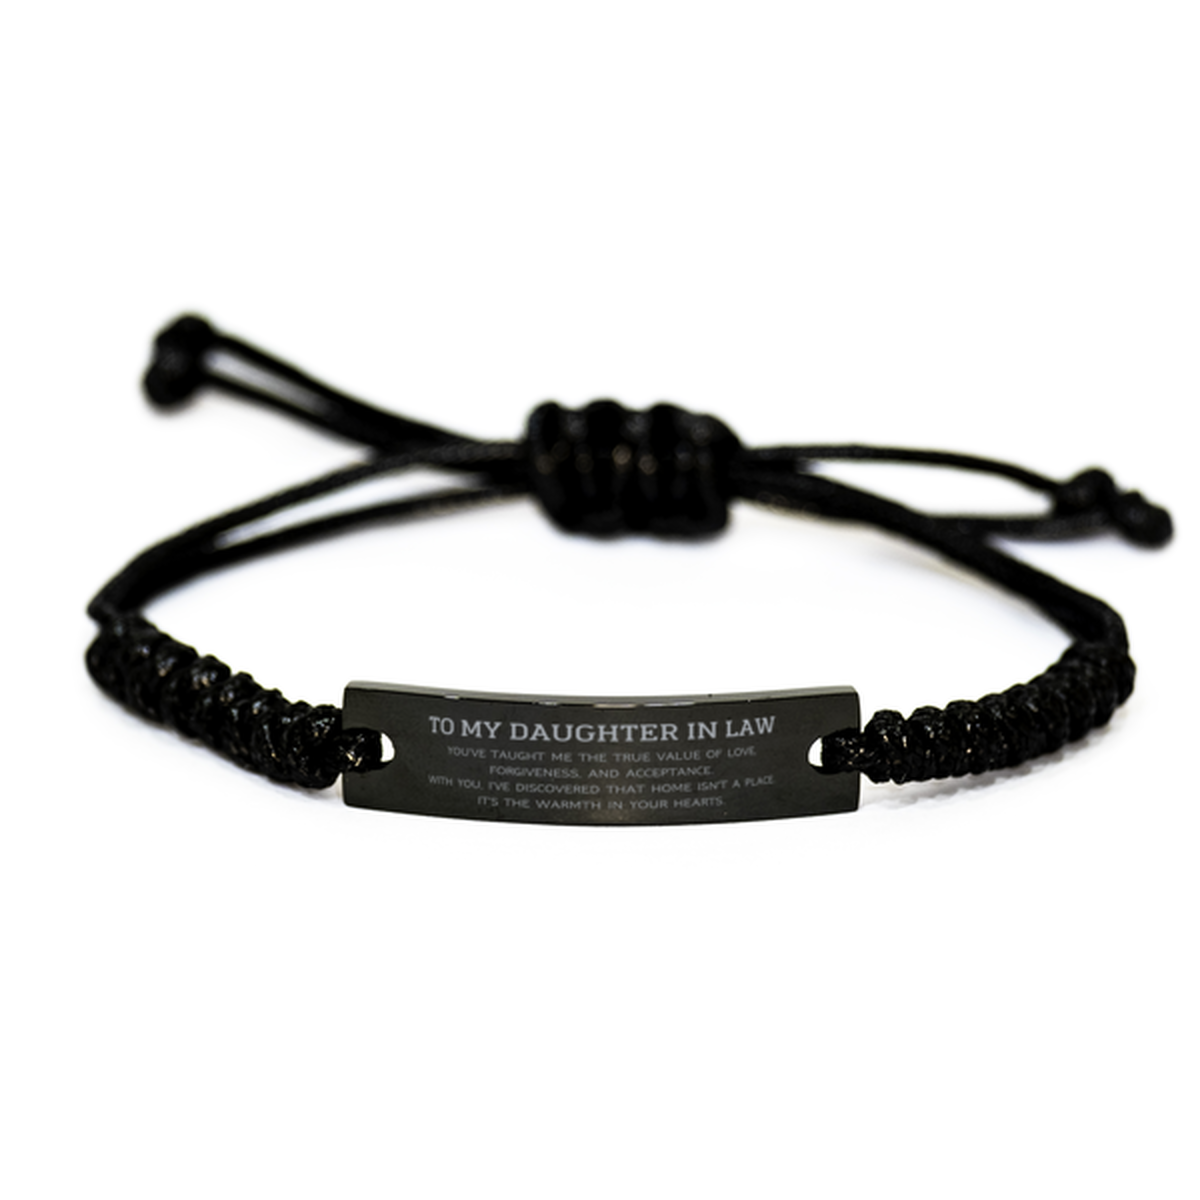 To My Daughter In Law Gifts, You've taught me the true value of love, Thank You Gifts For Daughter In Law, Birthday Black Rope Bracelet For Daughter In Law